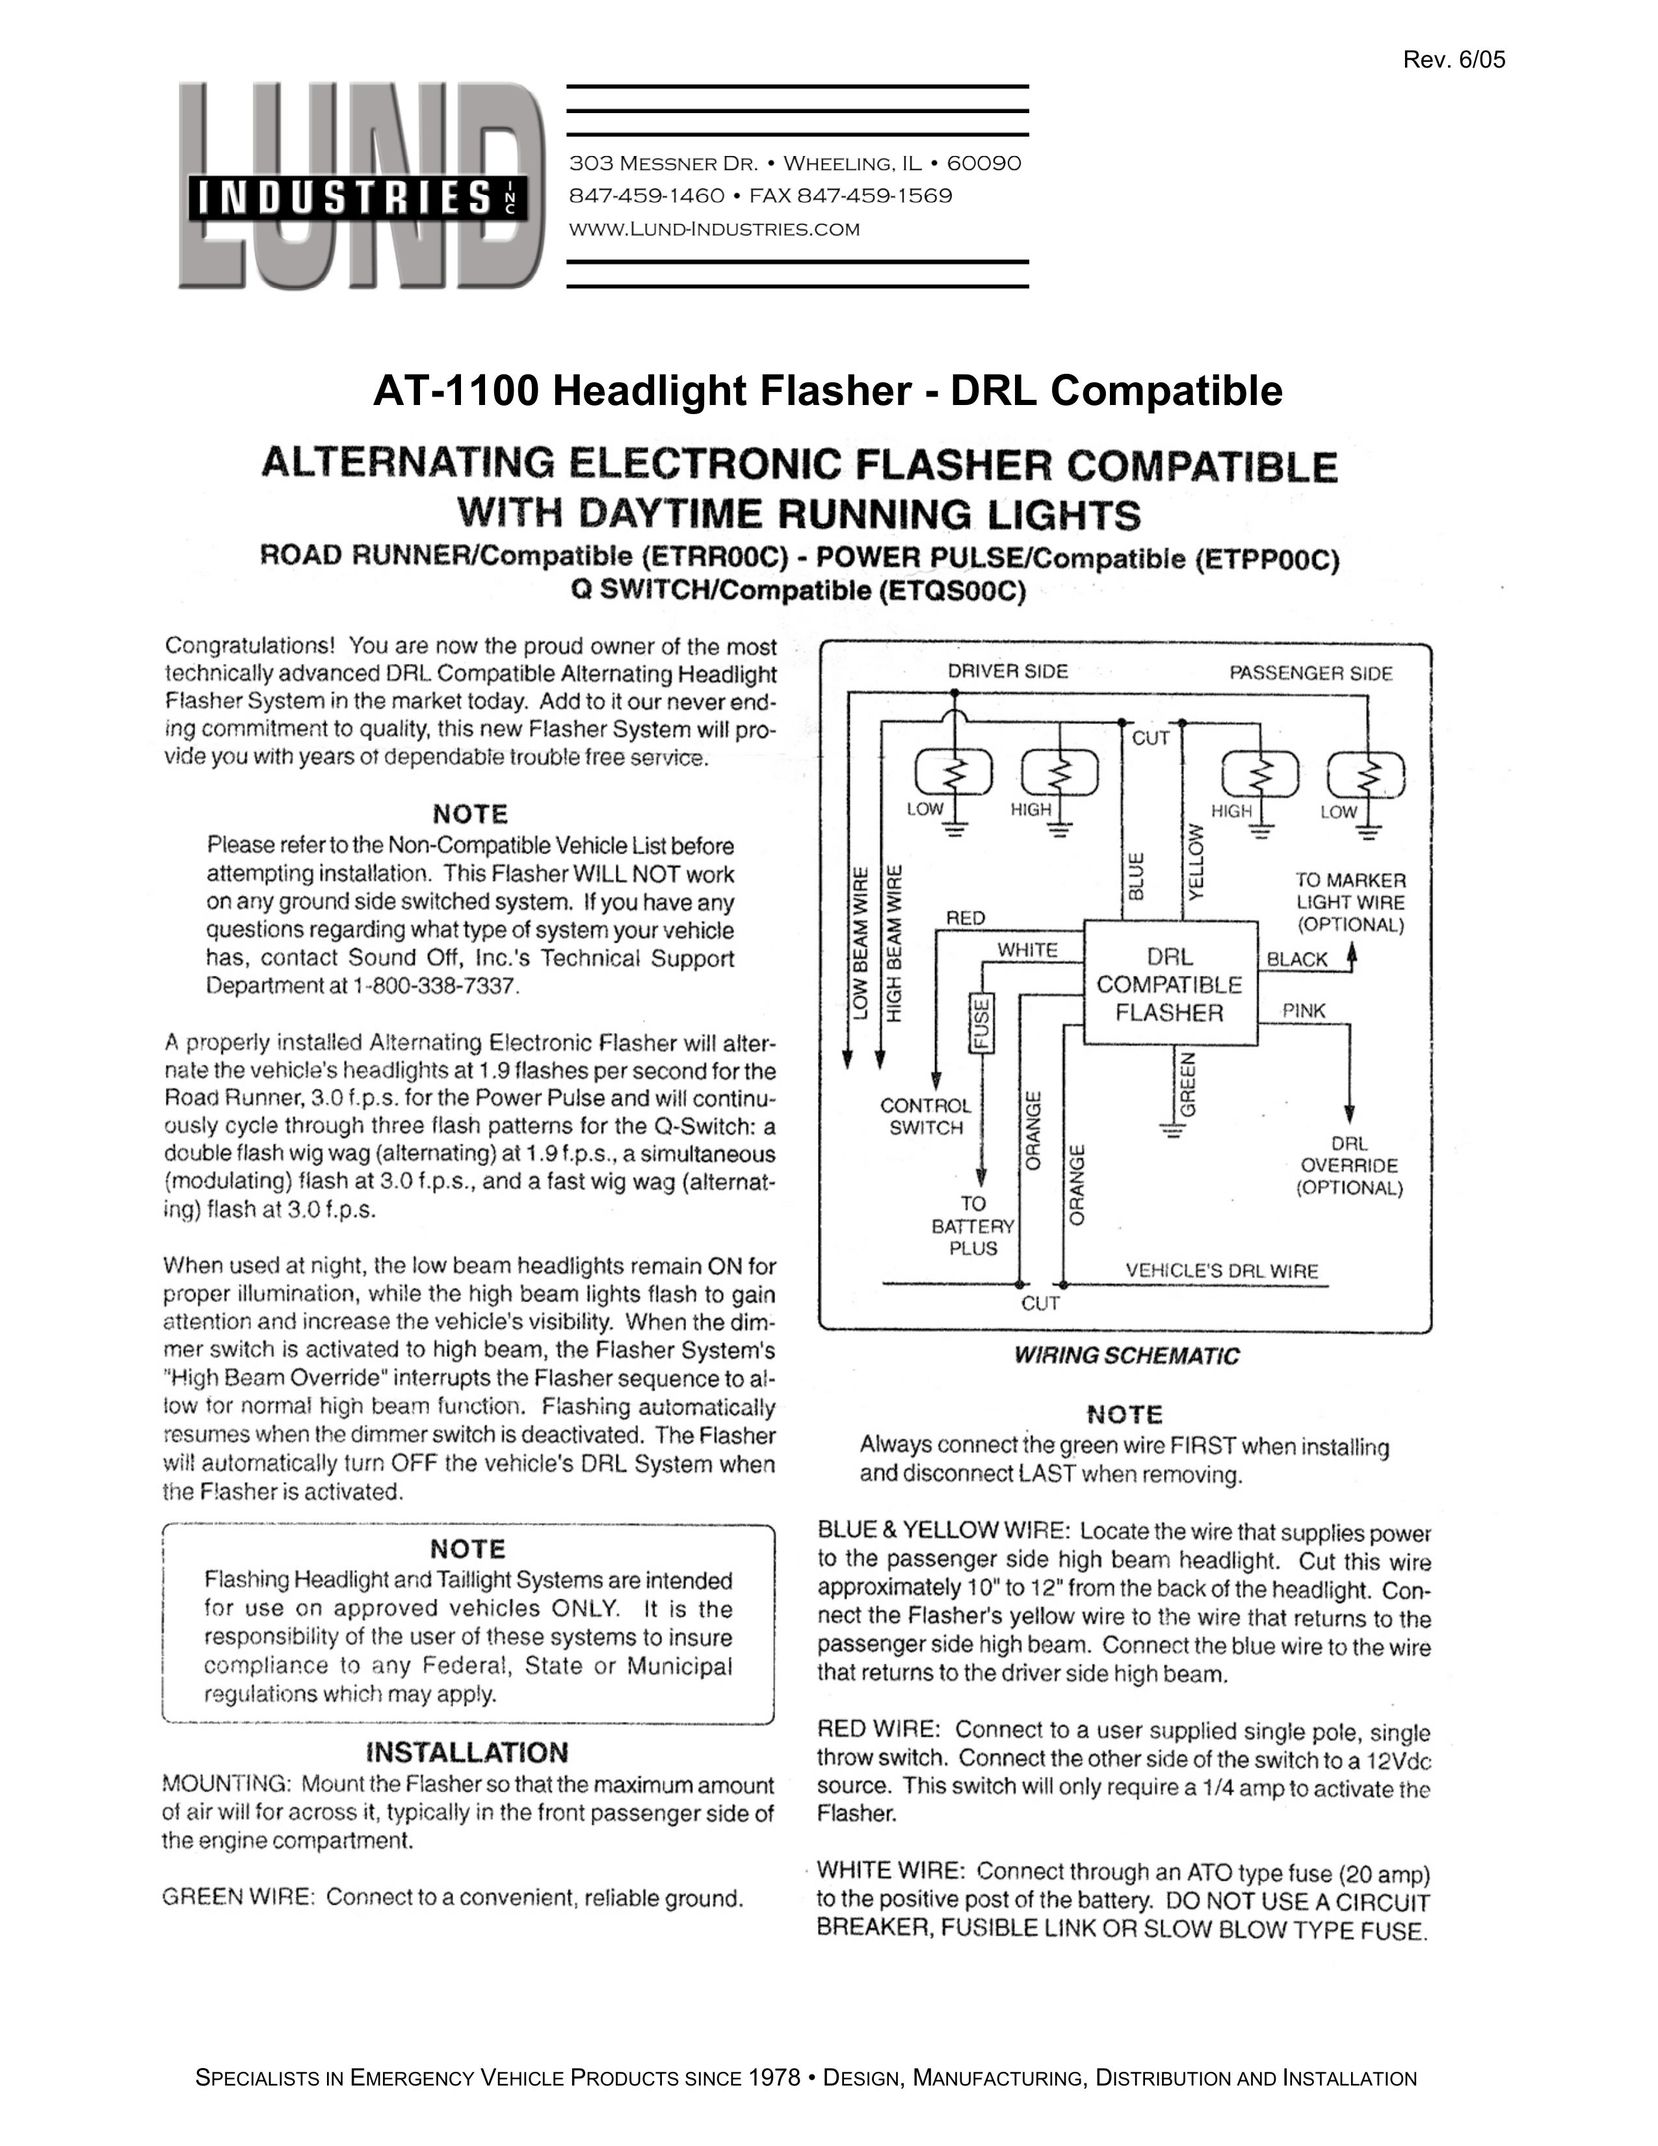 Lund Industries AT-1100 Work Light User Manual